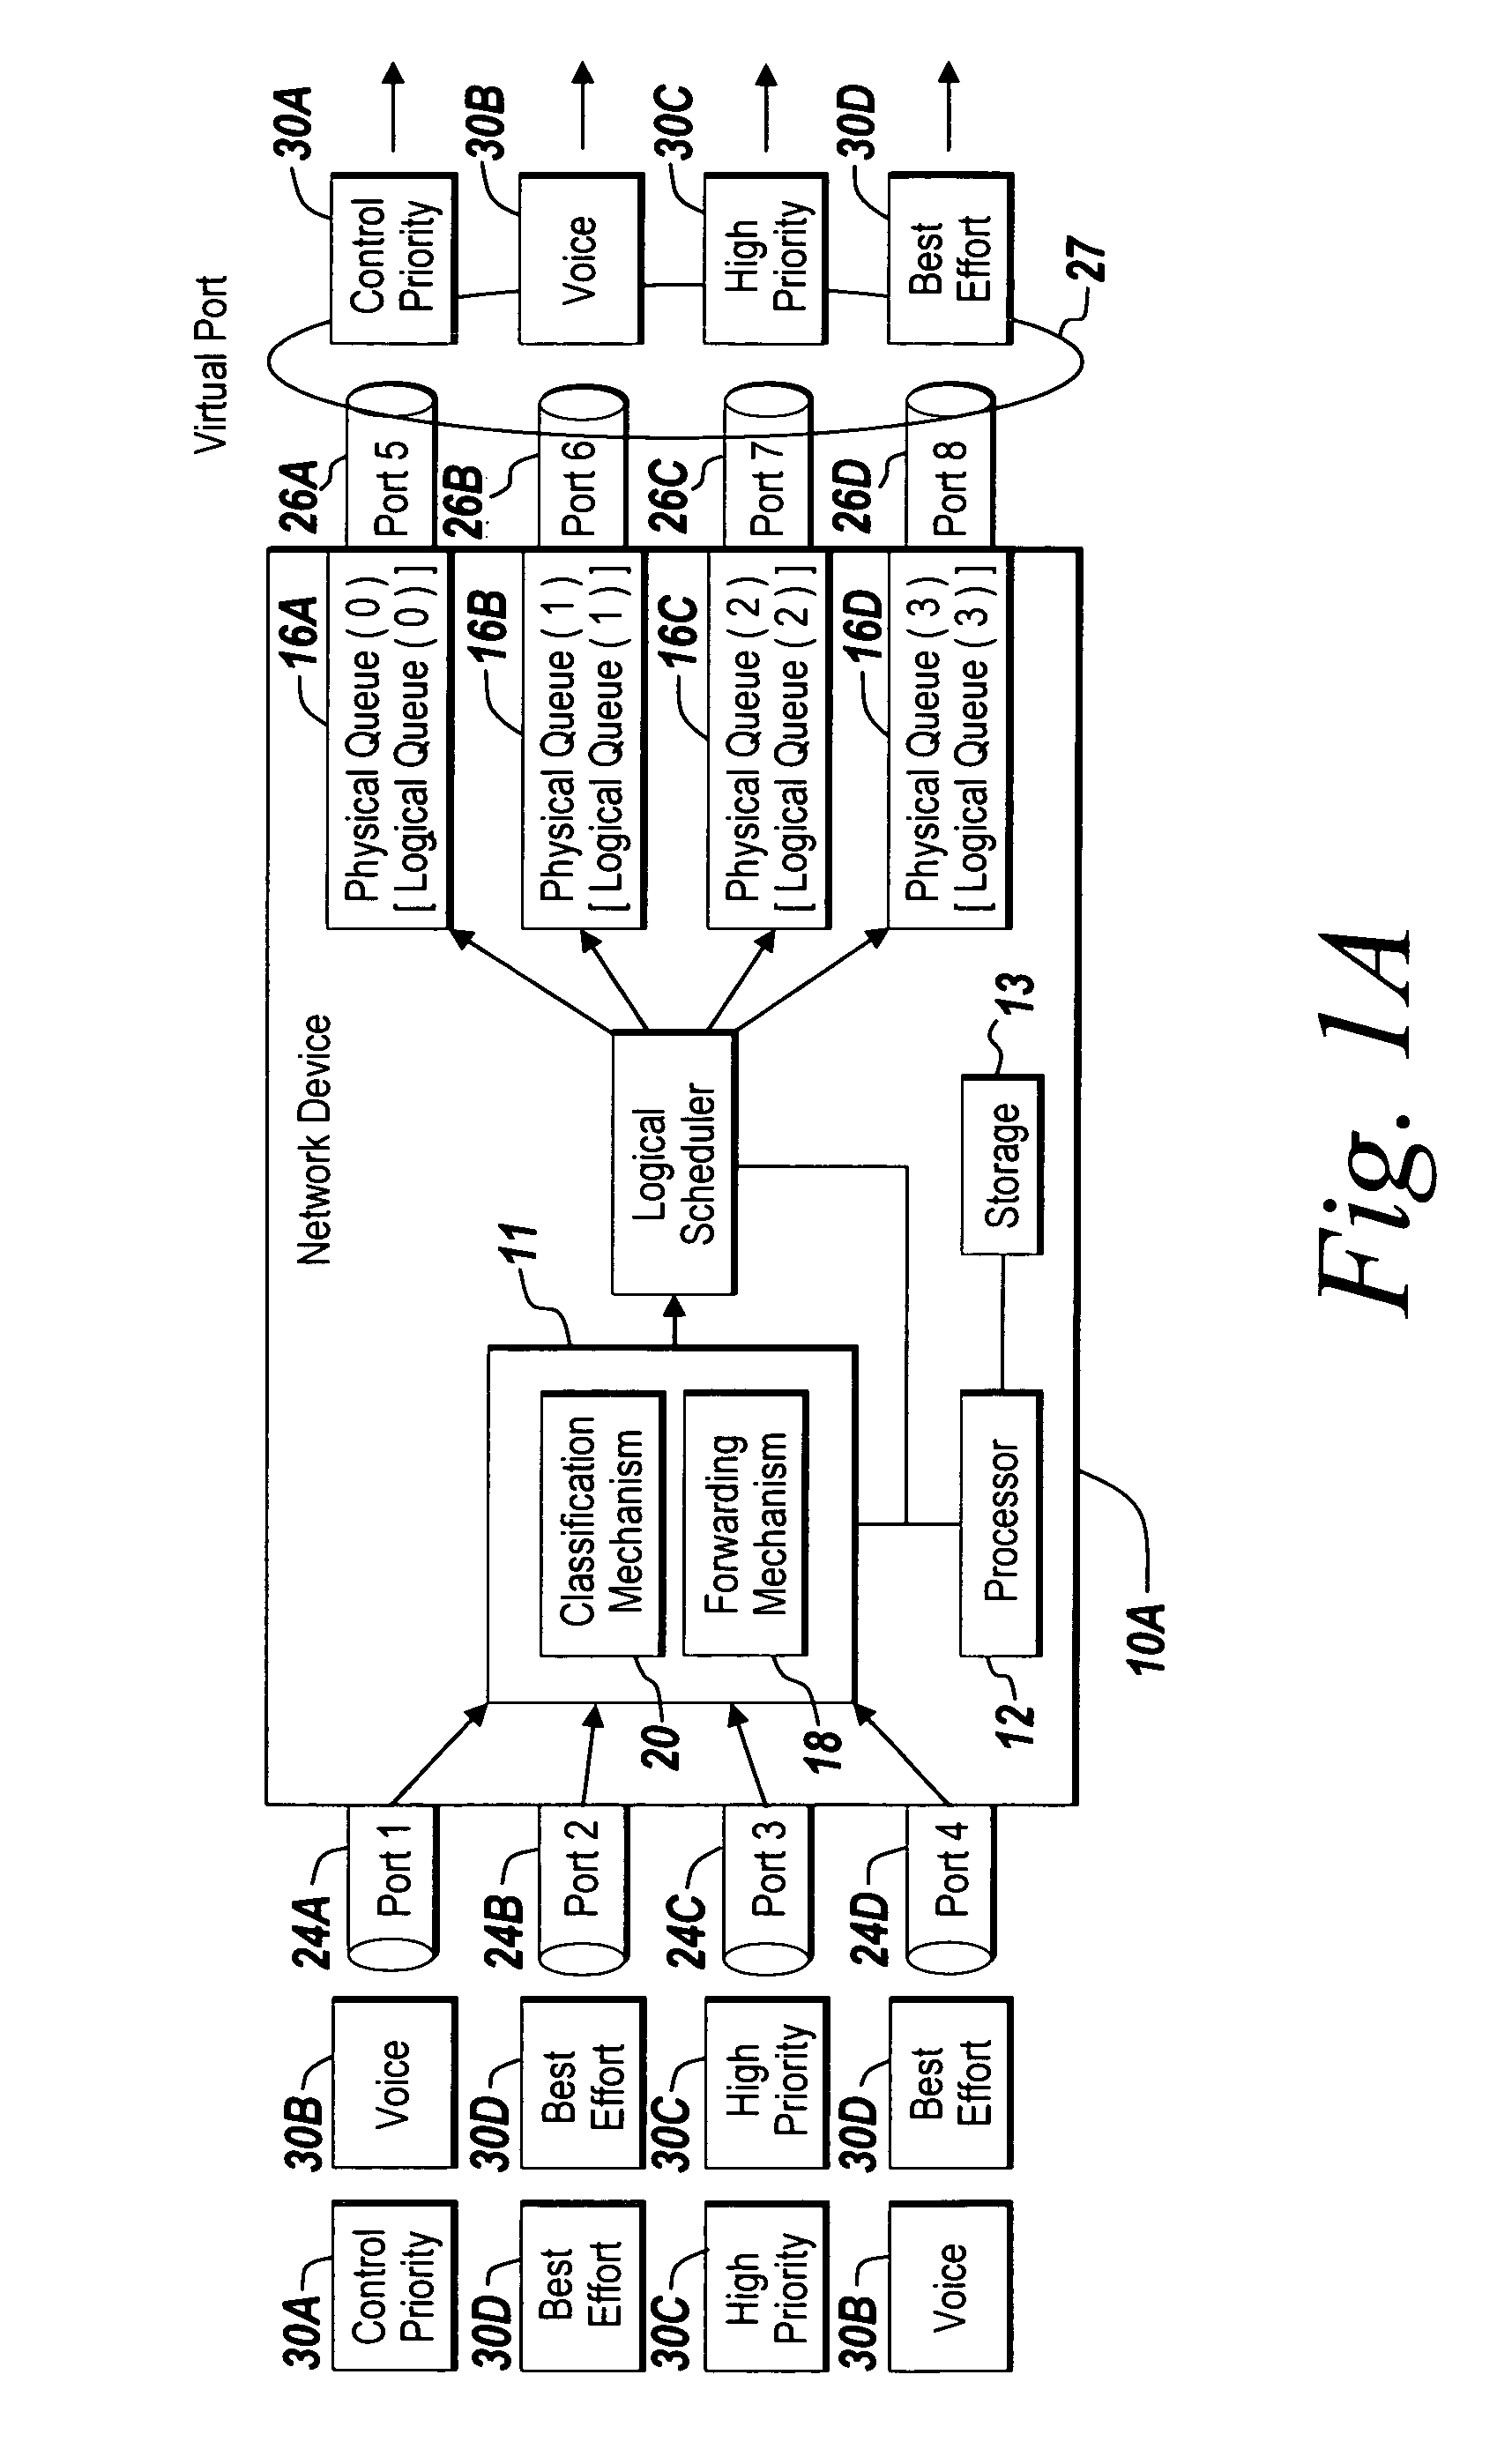 Method and apparatus of virtual class of service and logical queue representation through network traffic distribution over multiple port interfaces